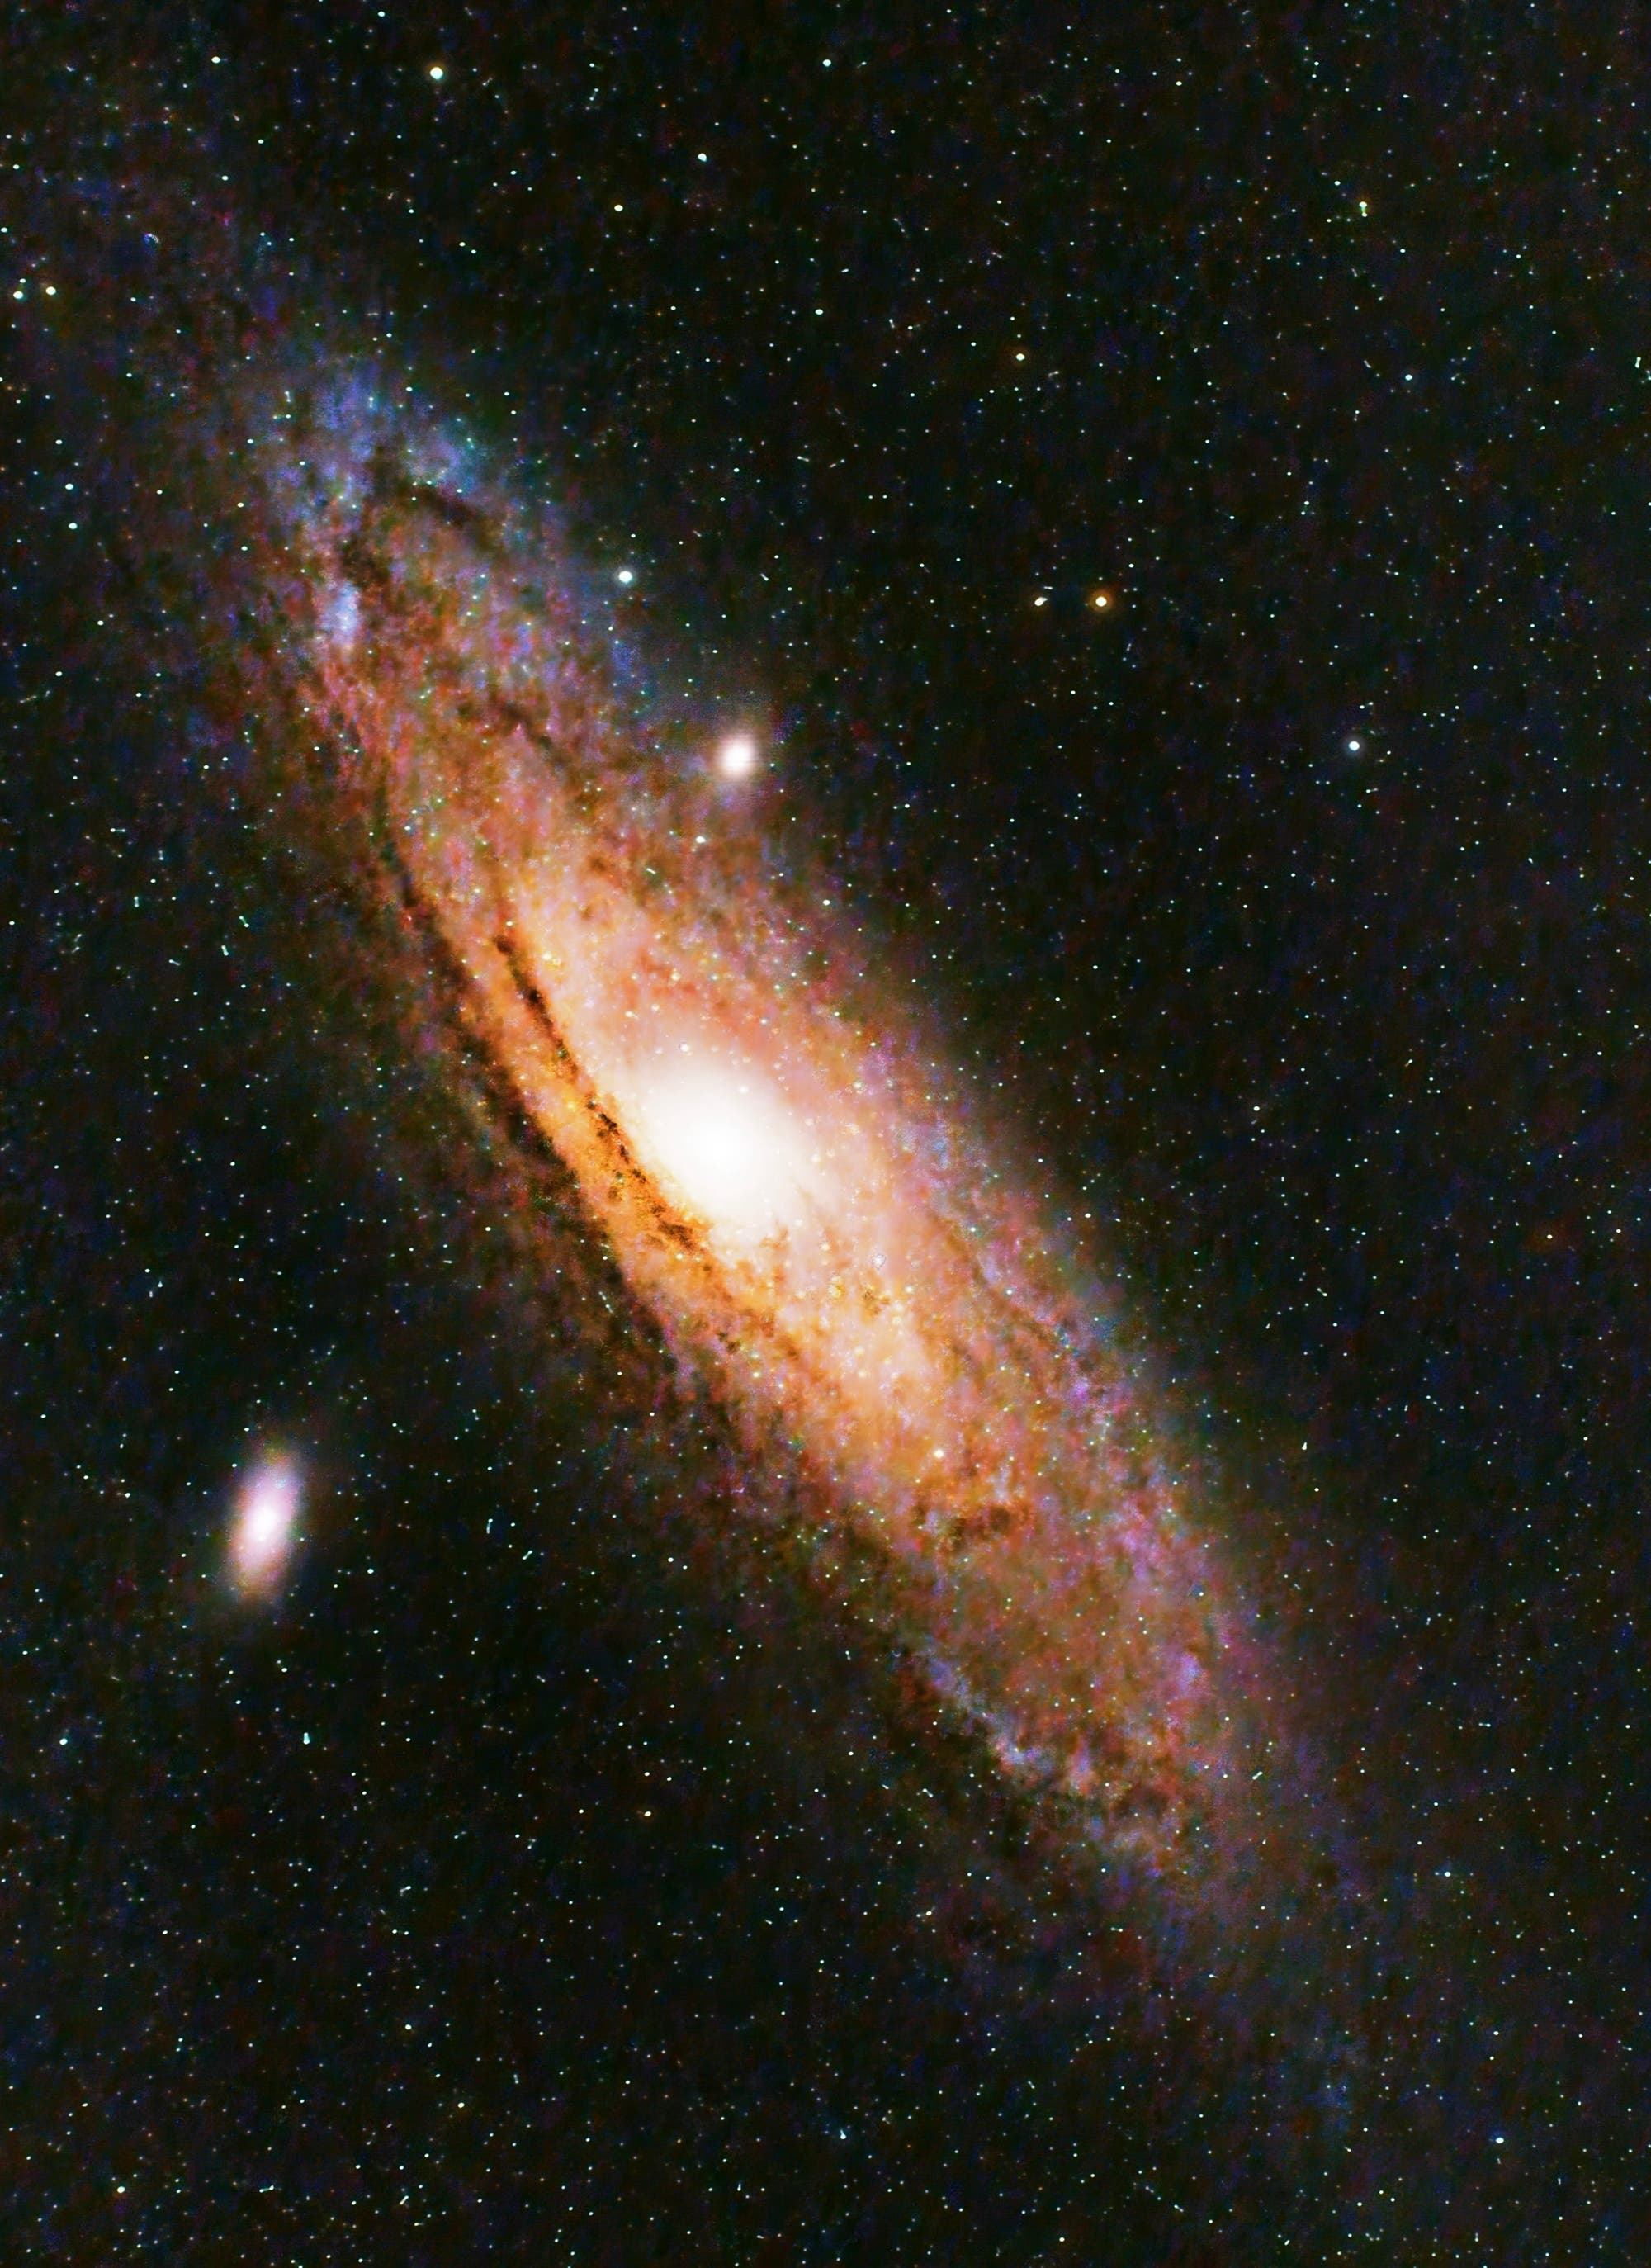 Messier 31 Andromedagalaxie